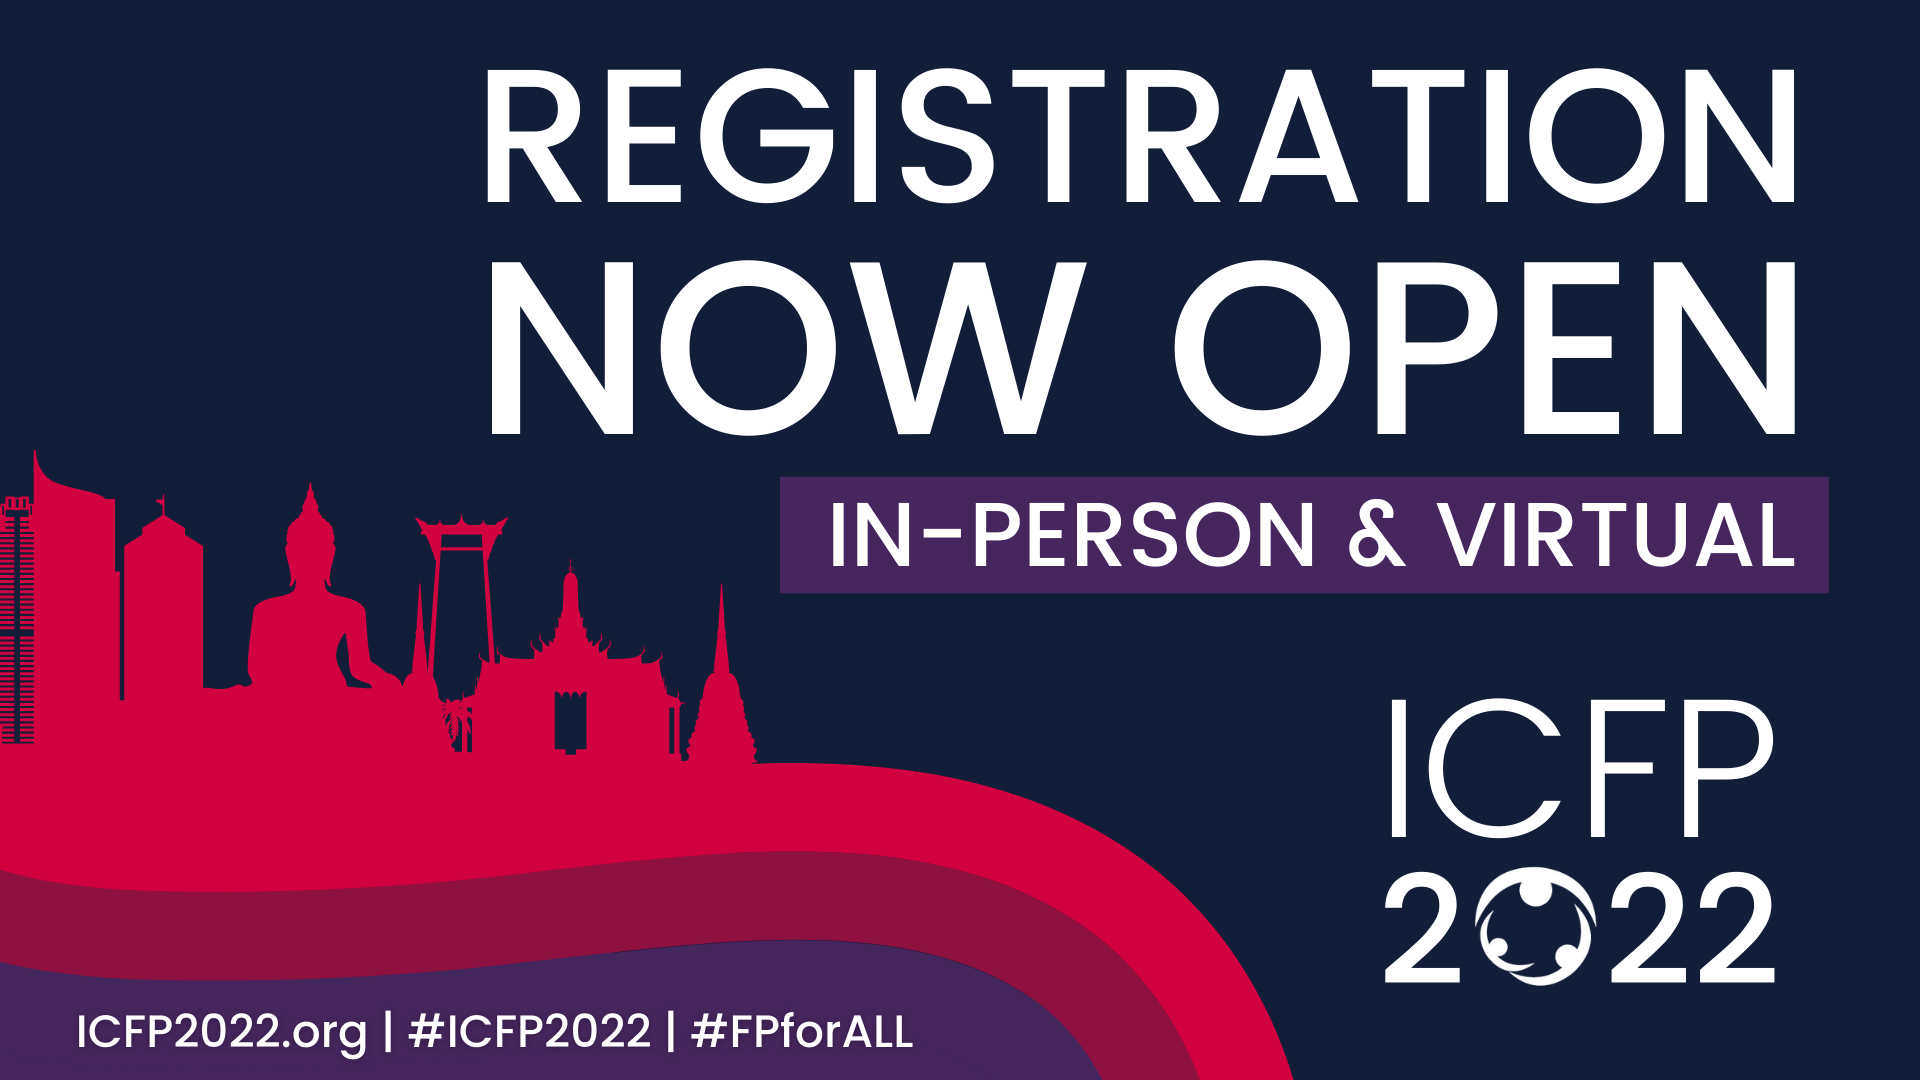 Registration for the Sixth ICFP is NOW OPEN